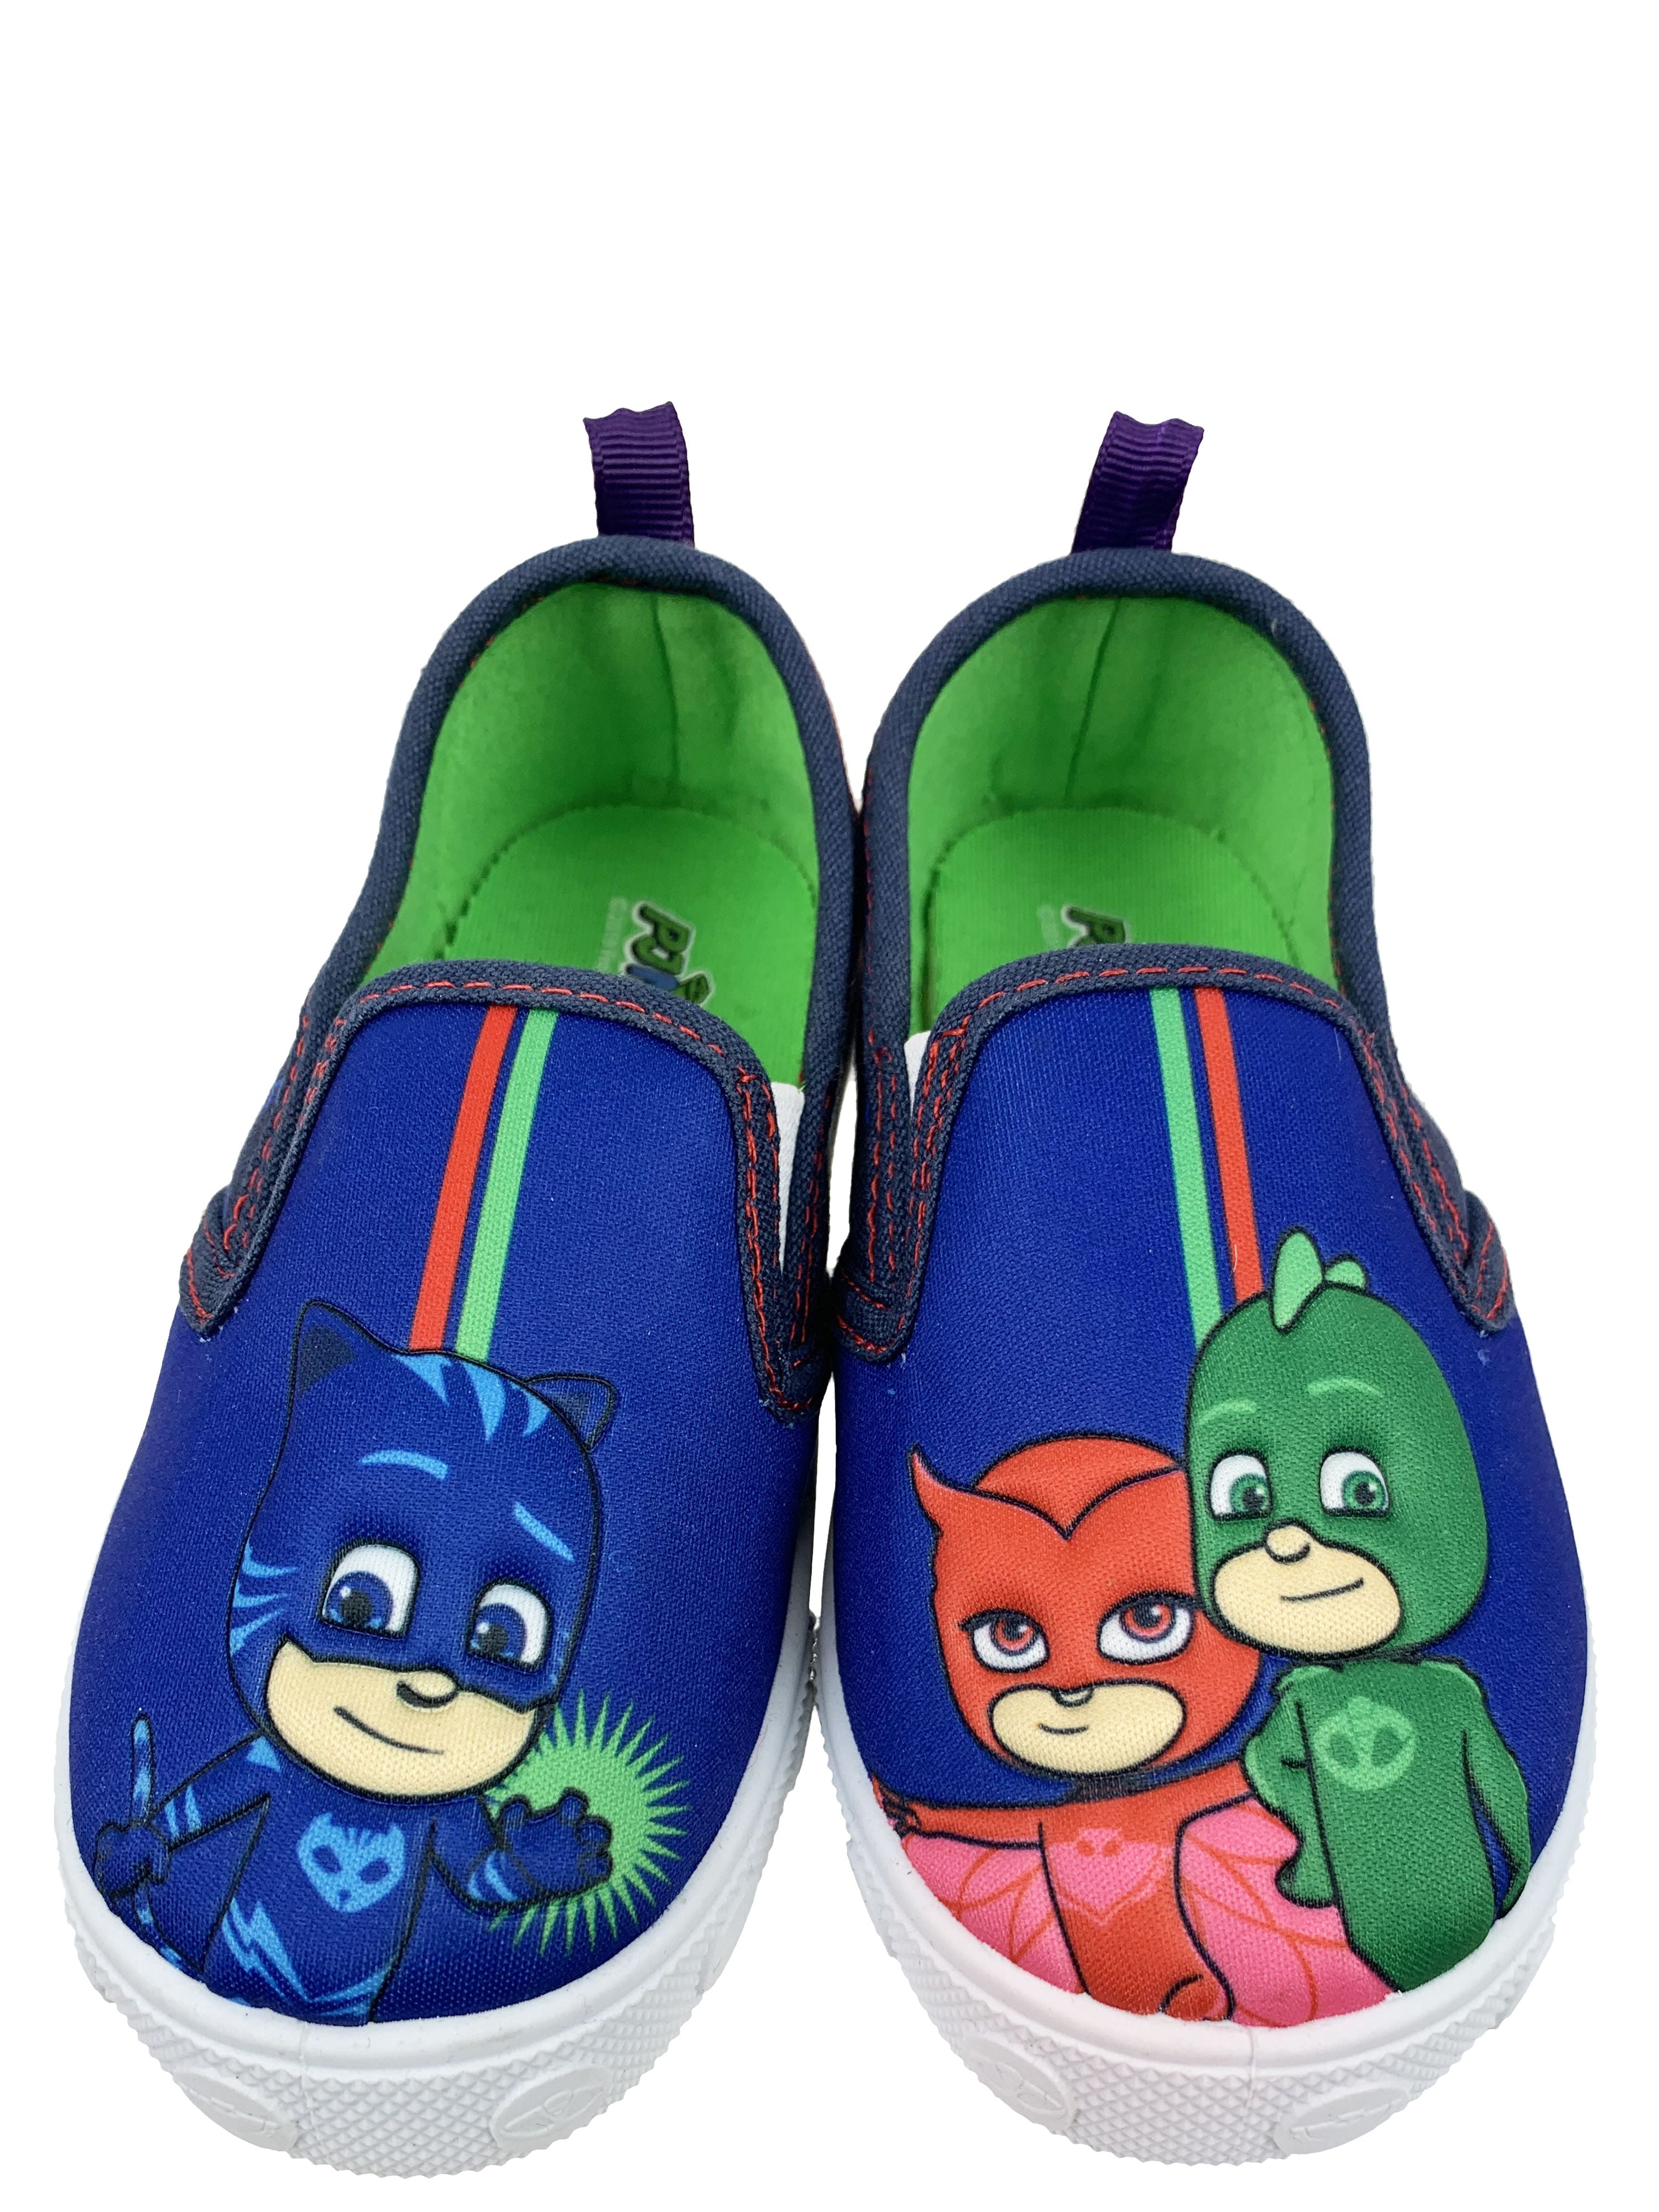 PJ Masks Toddler Shoes,Low Top Slip On Sneaker,Catboy Gekko and Owlette,Toddler Size 5 to 12 